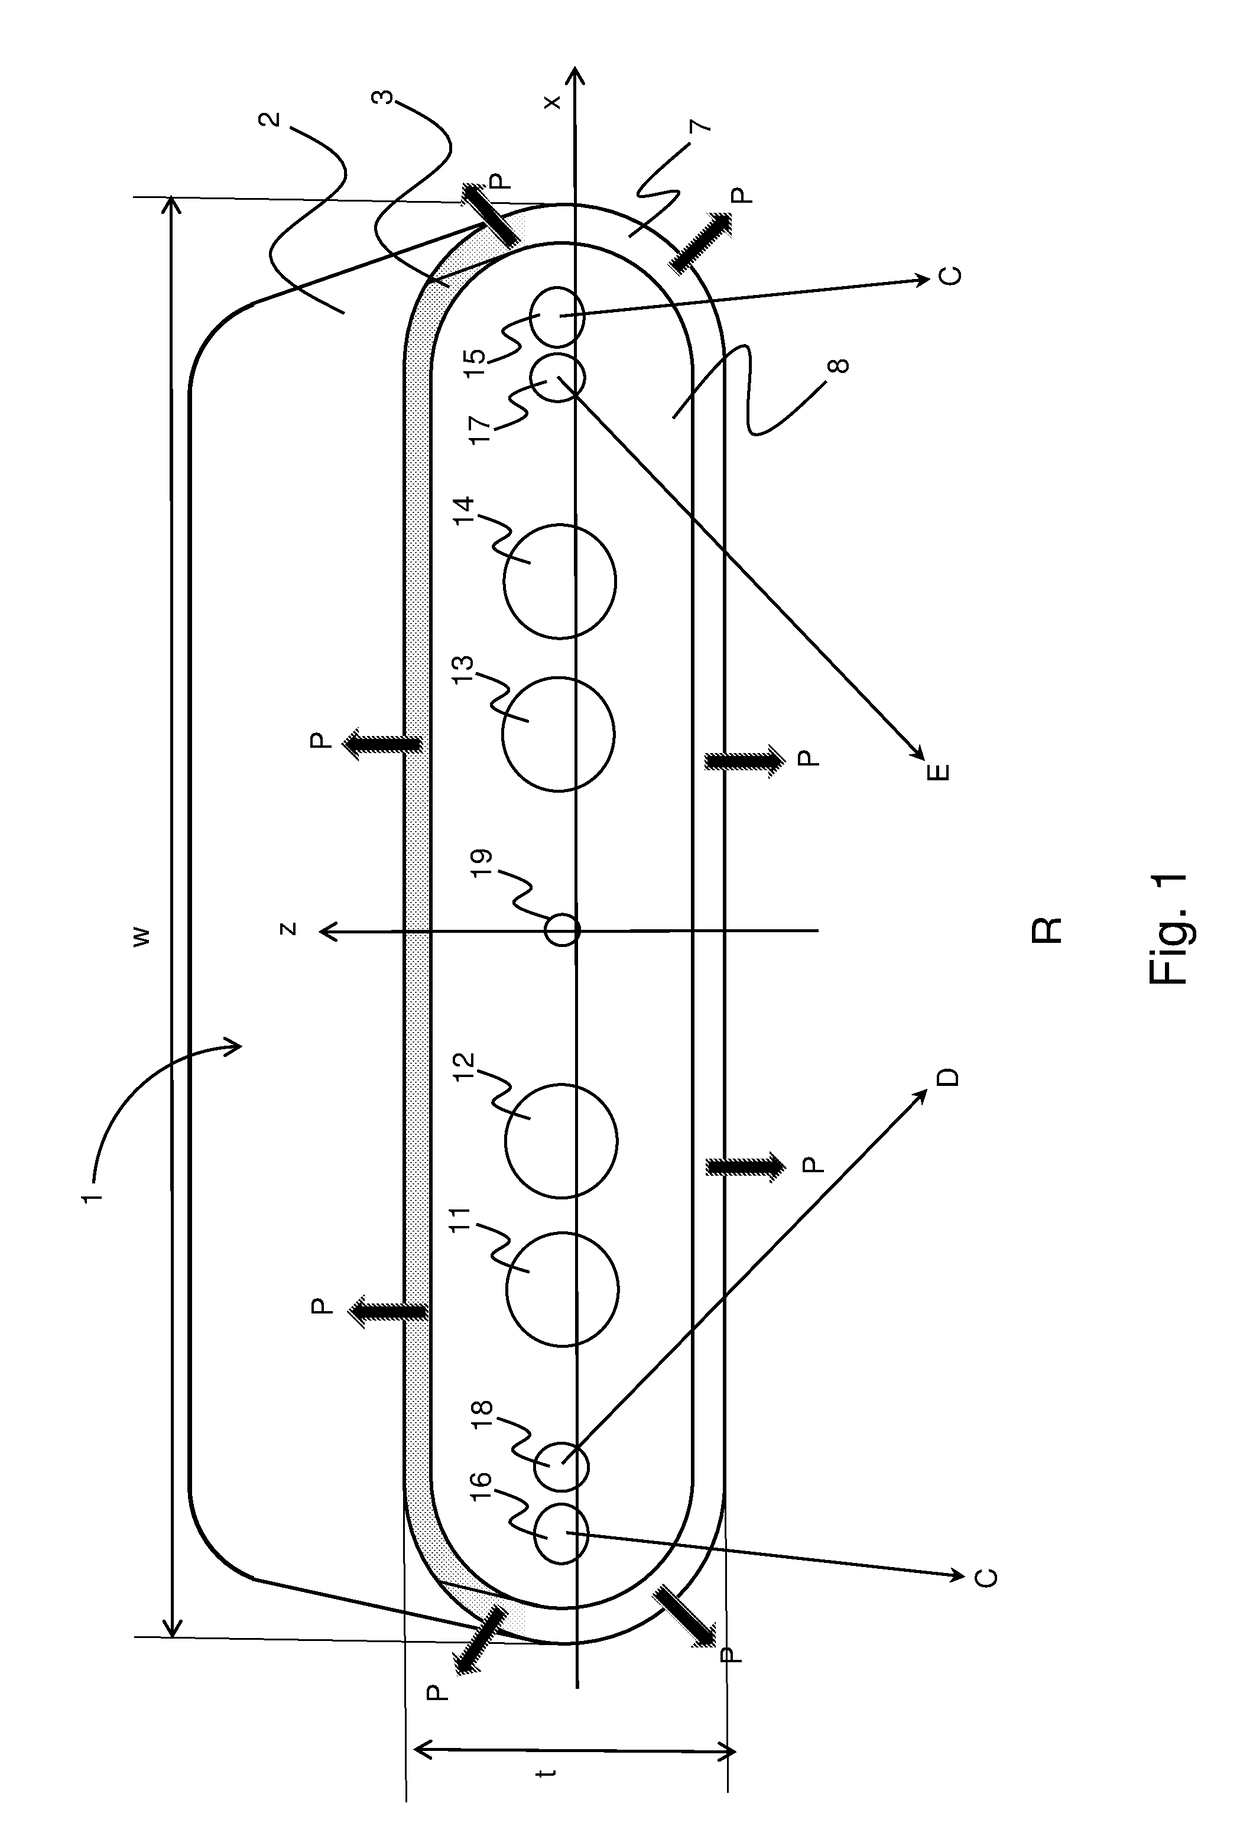 Loudspeaker device or system with controlled sound fields